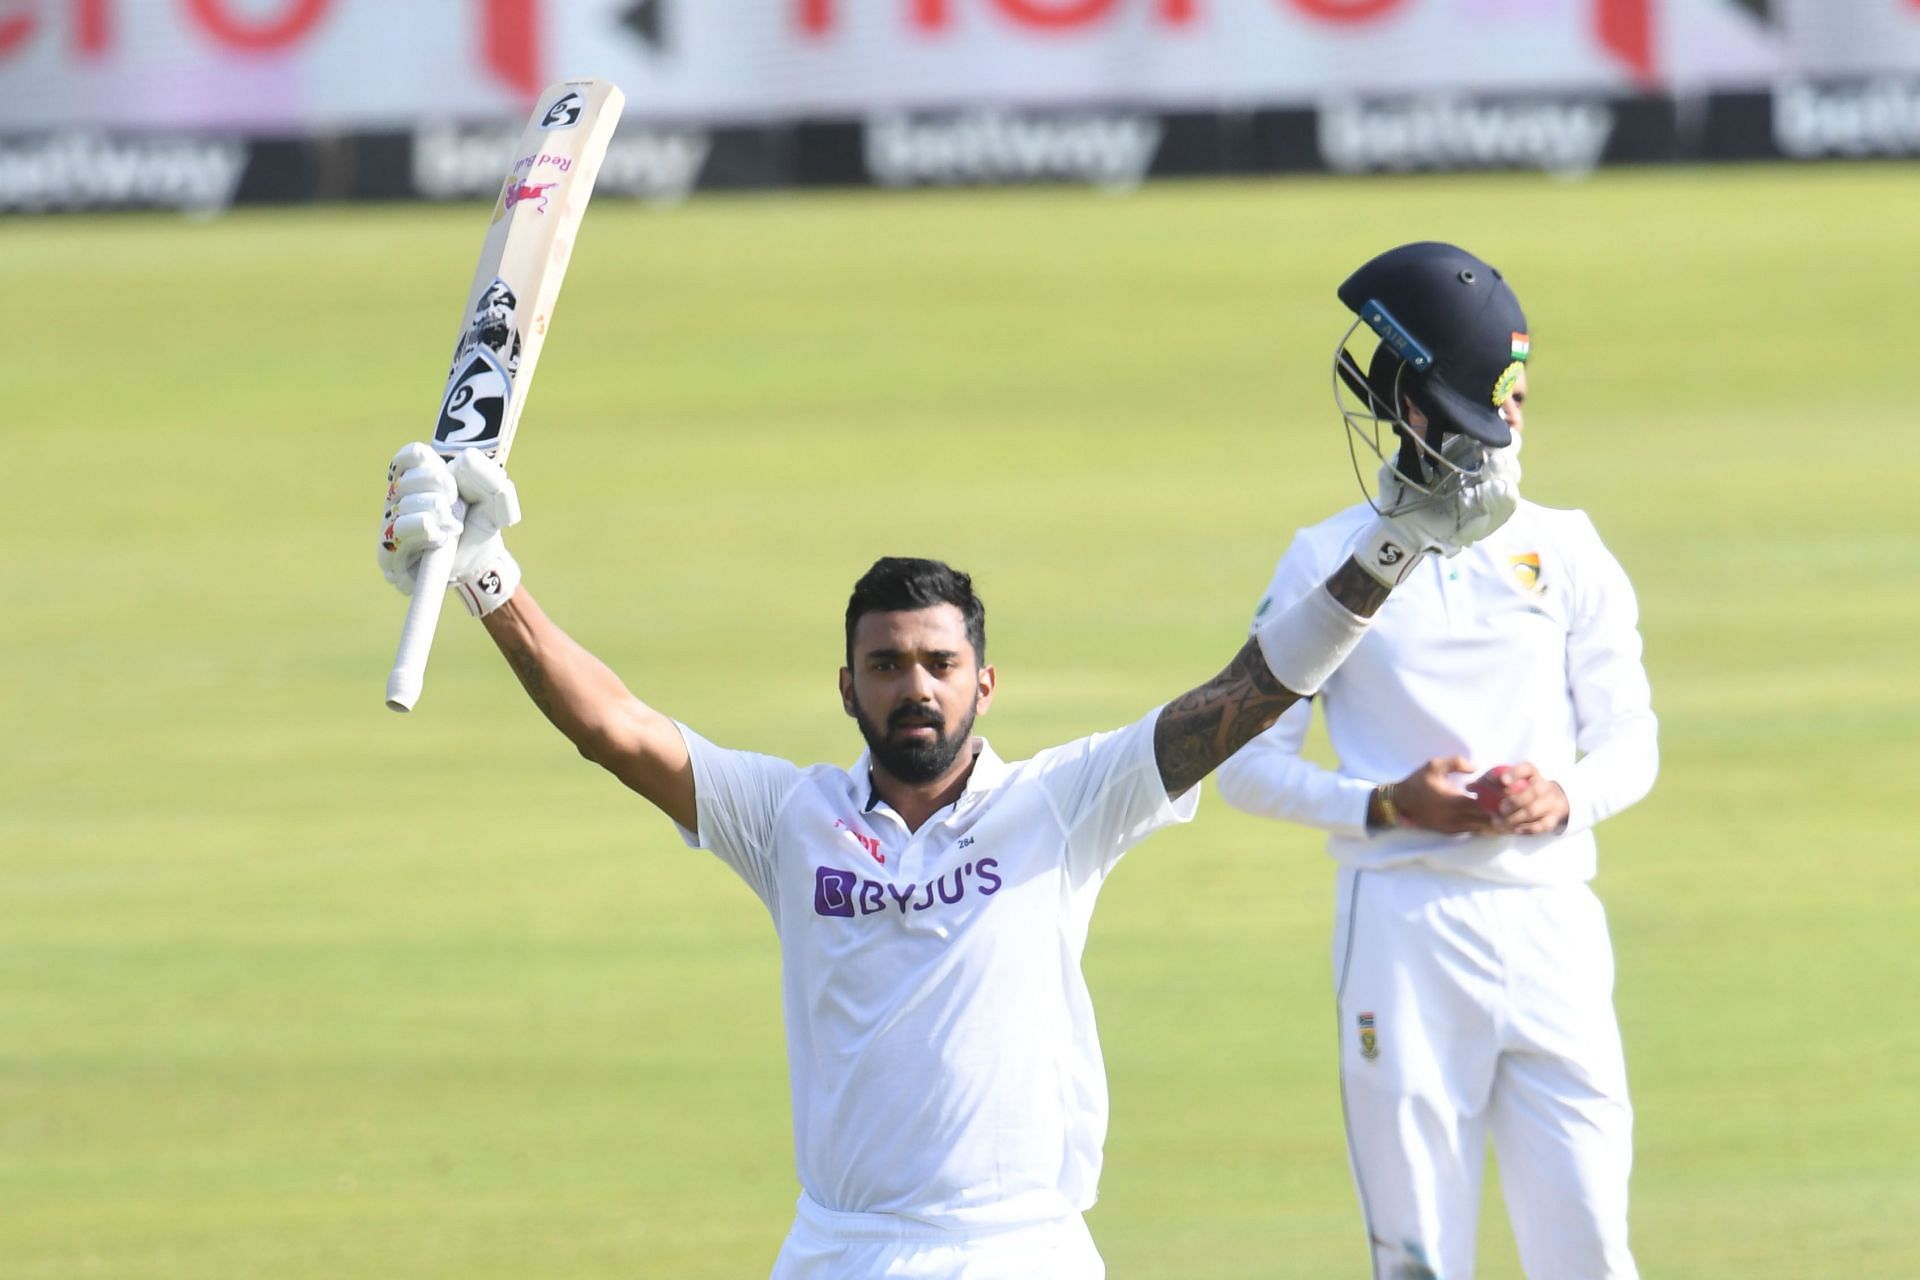 KL Rahul scored a sublime century on Day 1 of the Centurion Test